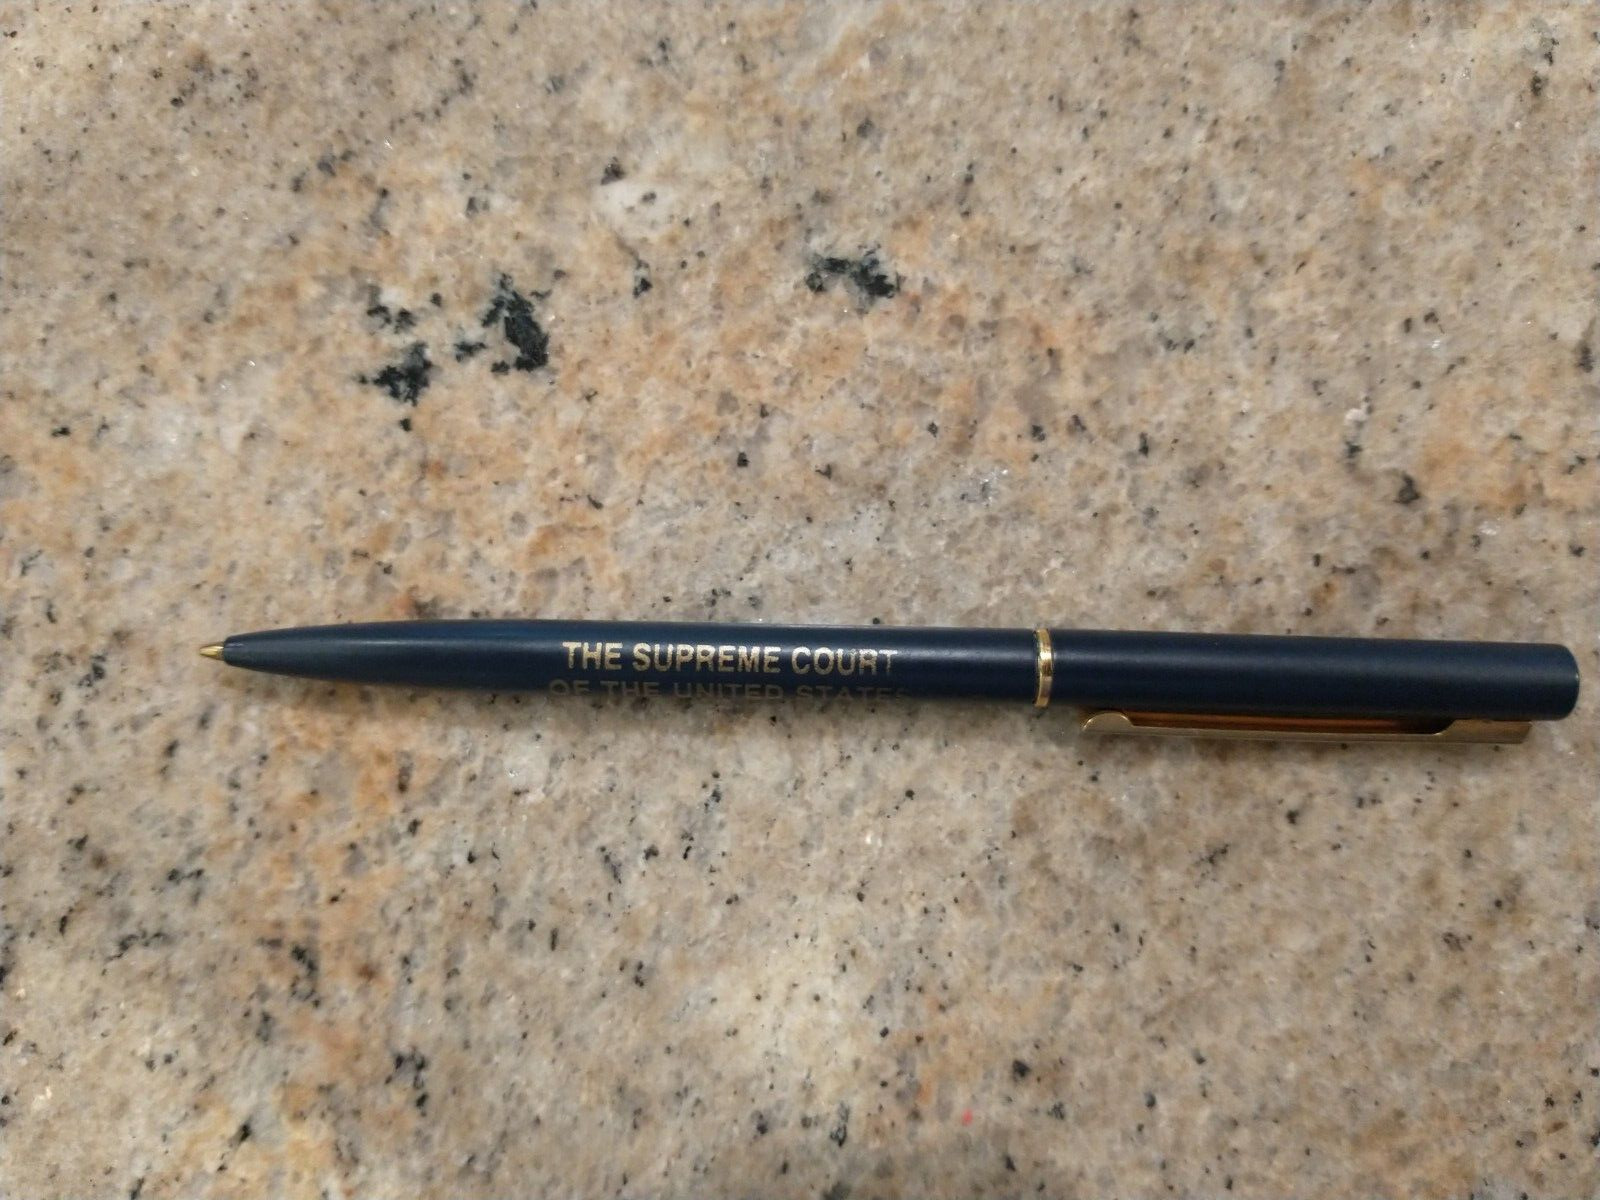 VTG Bankers Ballpoint Pen The Supreme Court of The United States